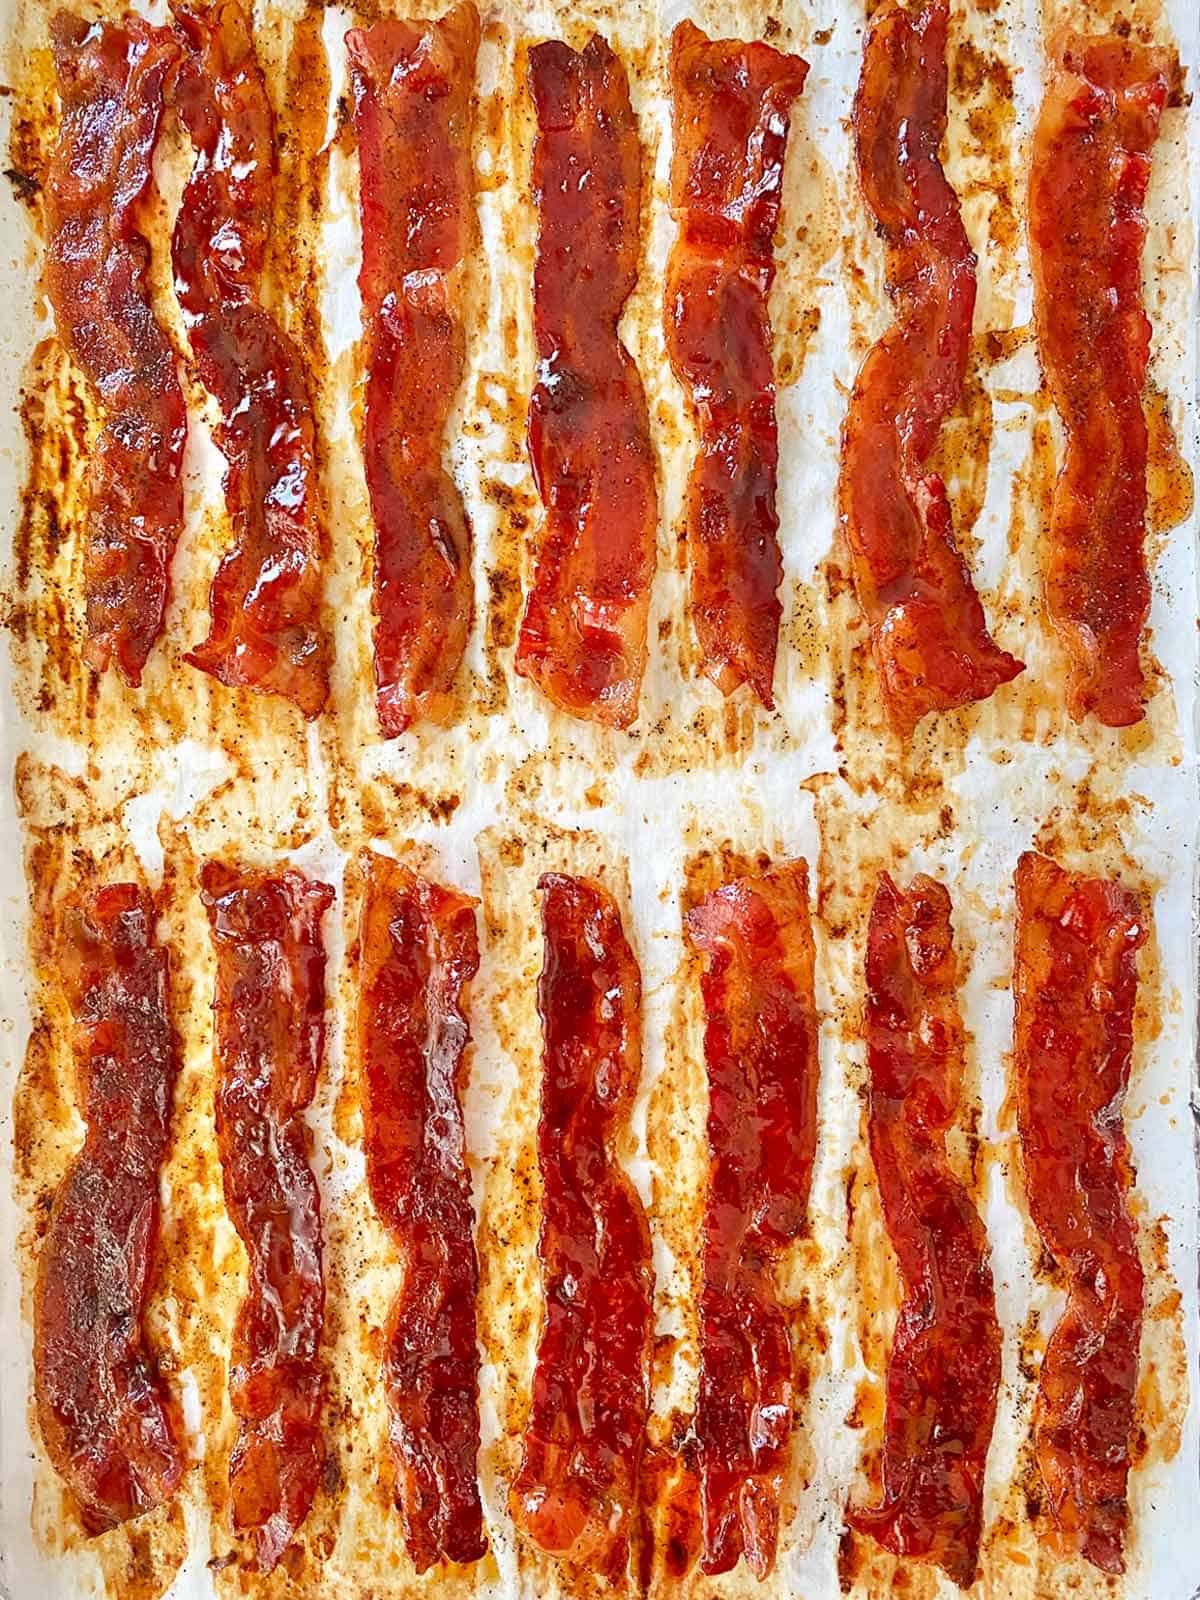 14 strips of honey candied bacon on a parchment lined baking sheet.